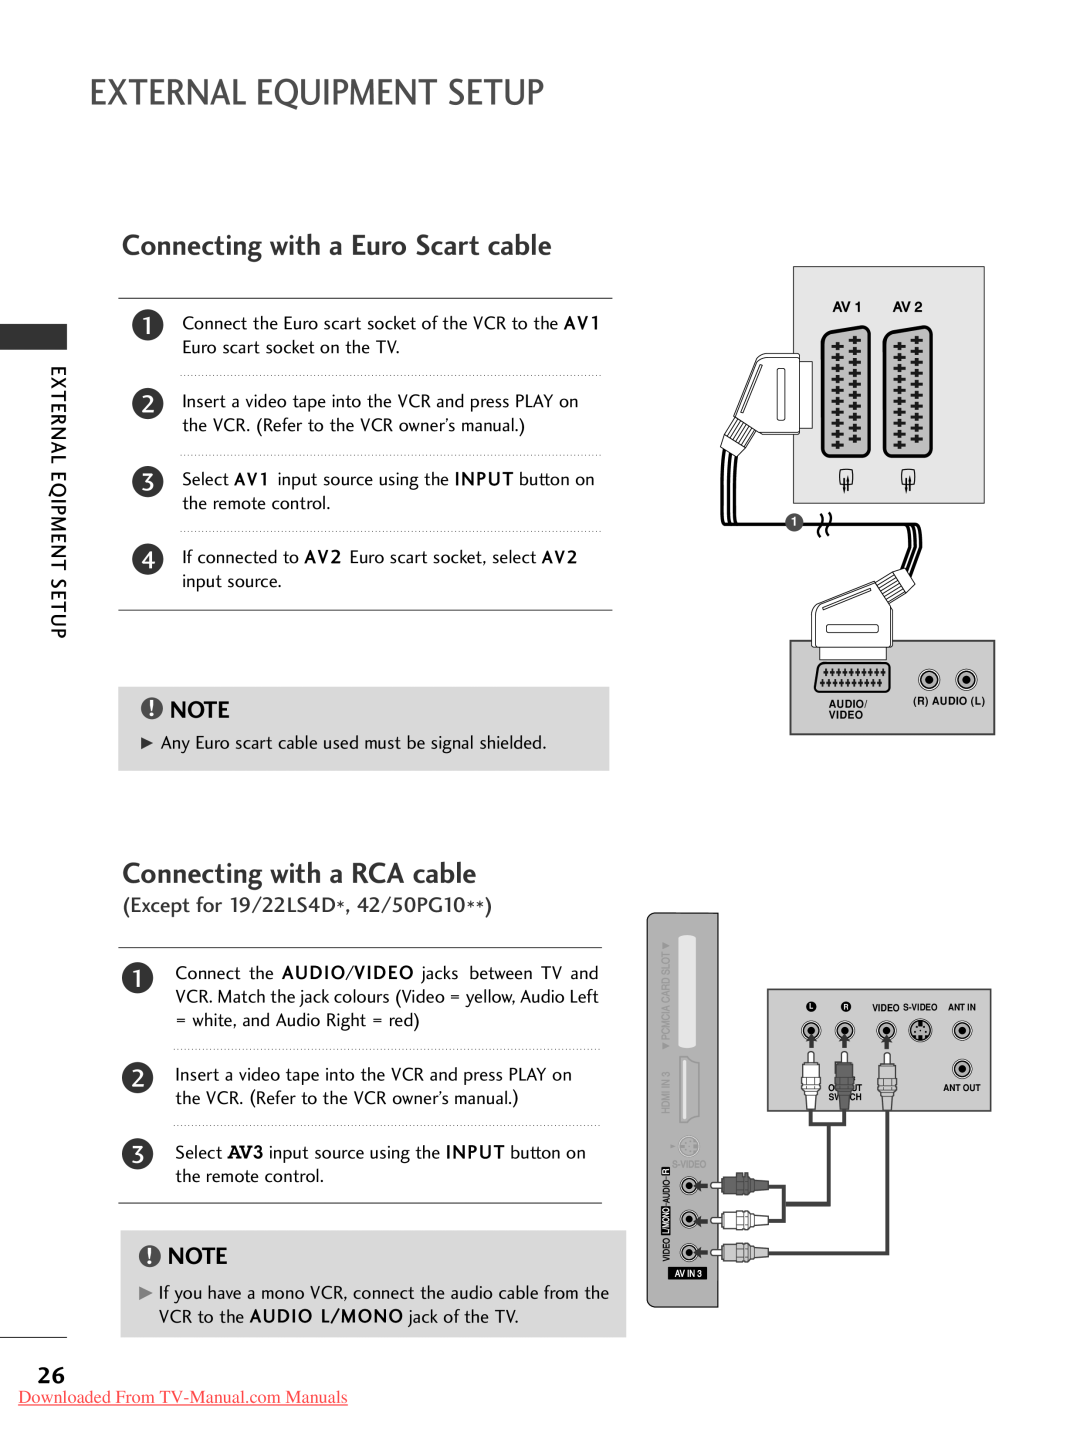 LG Electronics 42 2P PG G1 10 Connecting with a RCA cable, External Equipment Setup, Connecting with a Euro Scart cable 